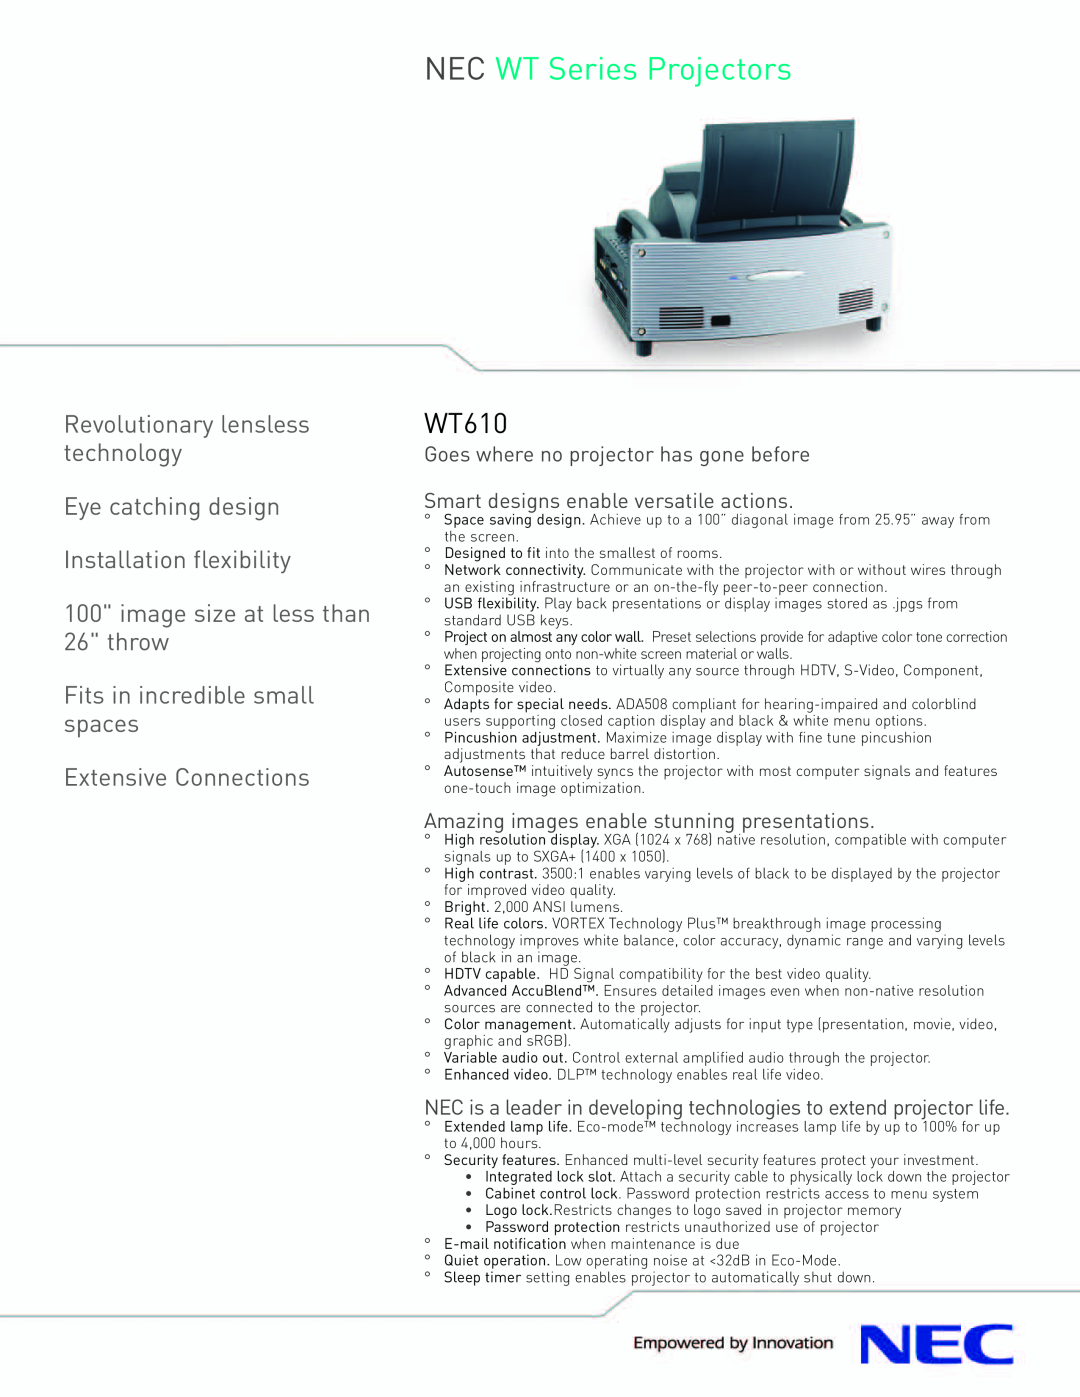 NEC manual NEC WT Series Projectors, WT610, Revolutionary lensless technology, image size at less than 26 throw 